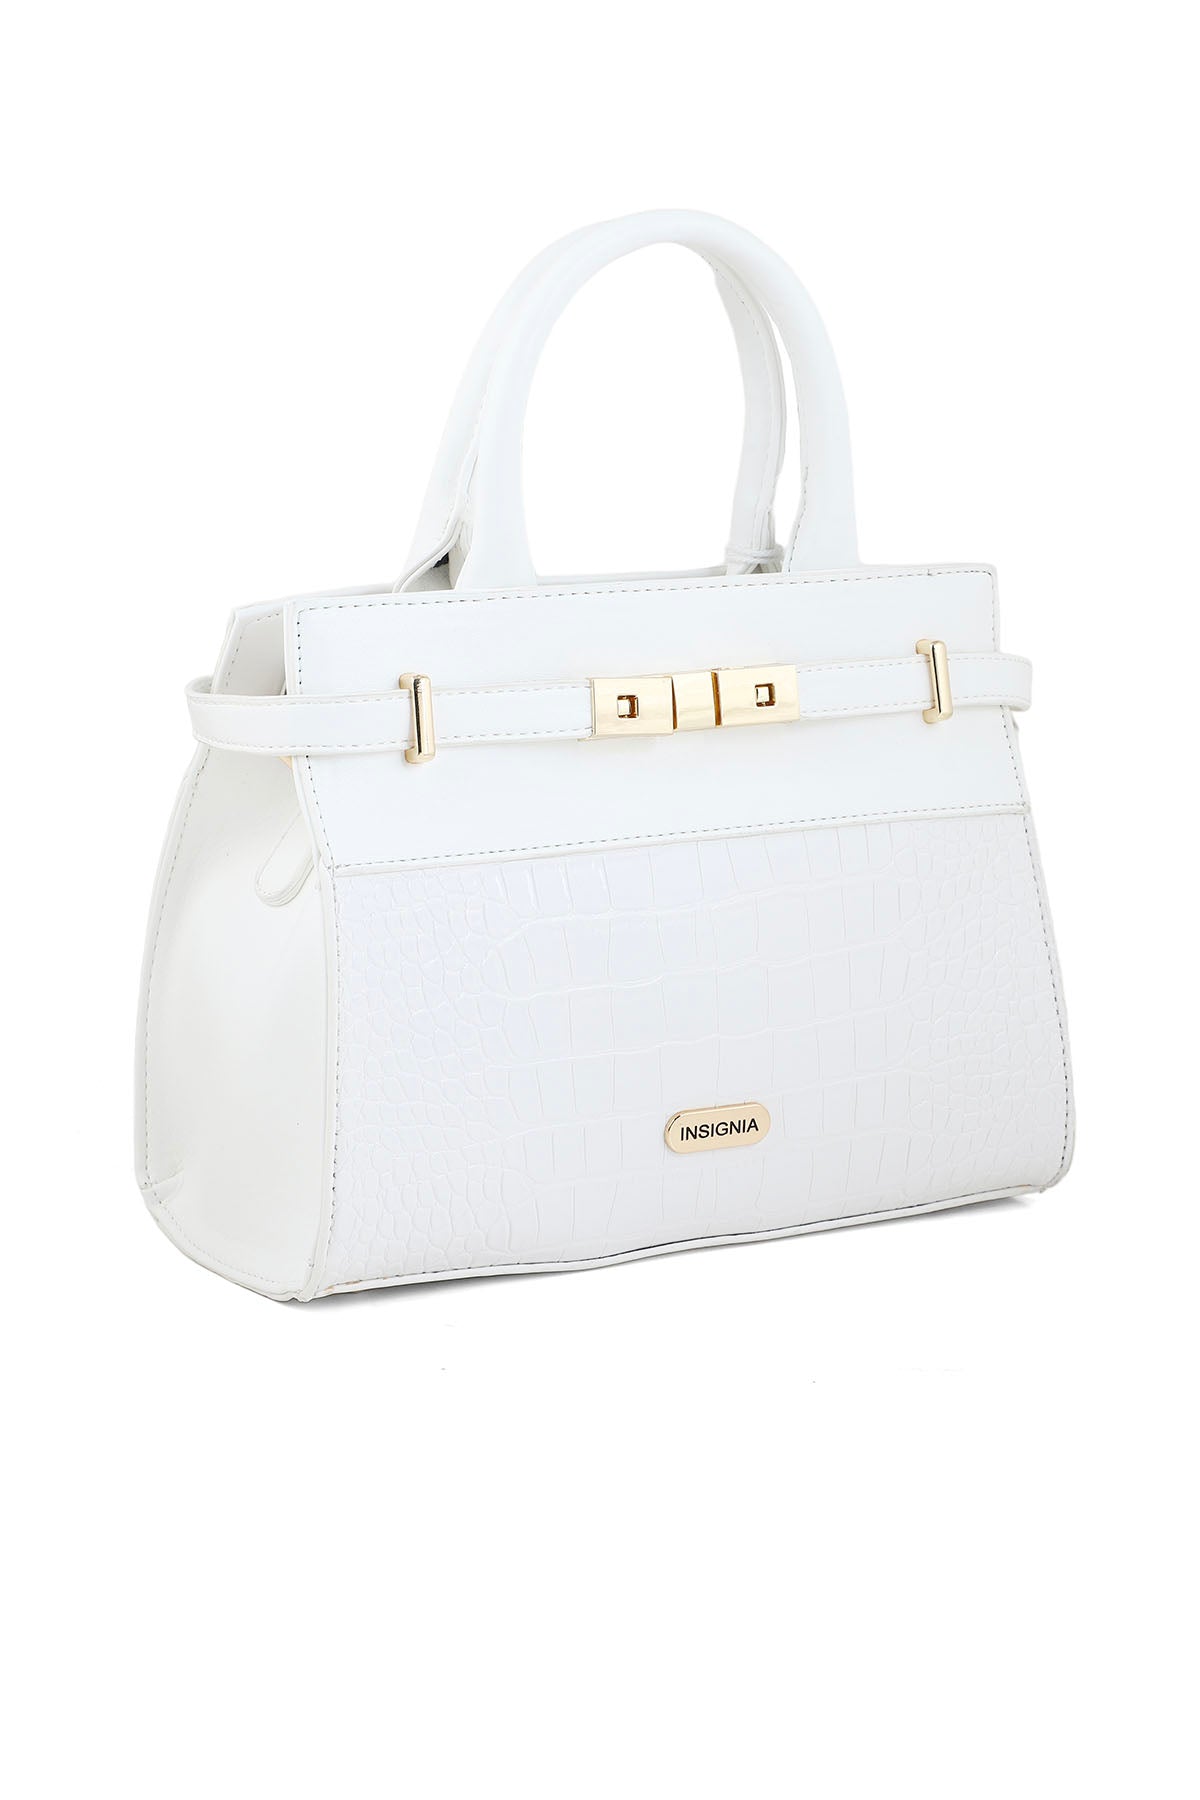 Formal Tote Hand Bags B15069-White